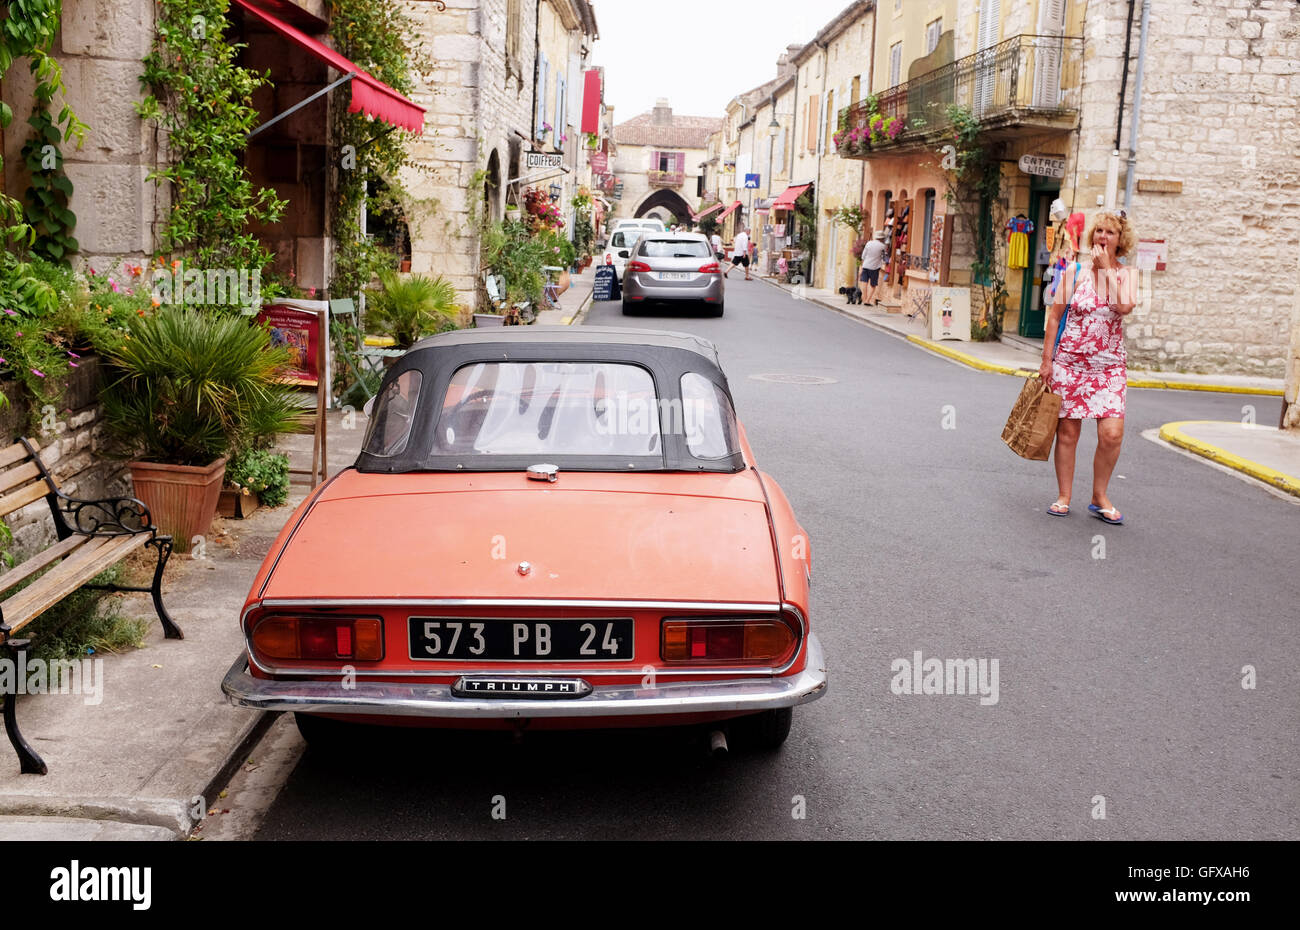 Old Triumph Spitfire parked in The bastide of Monpazier in Dordogne region of France Europe Stock Photo